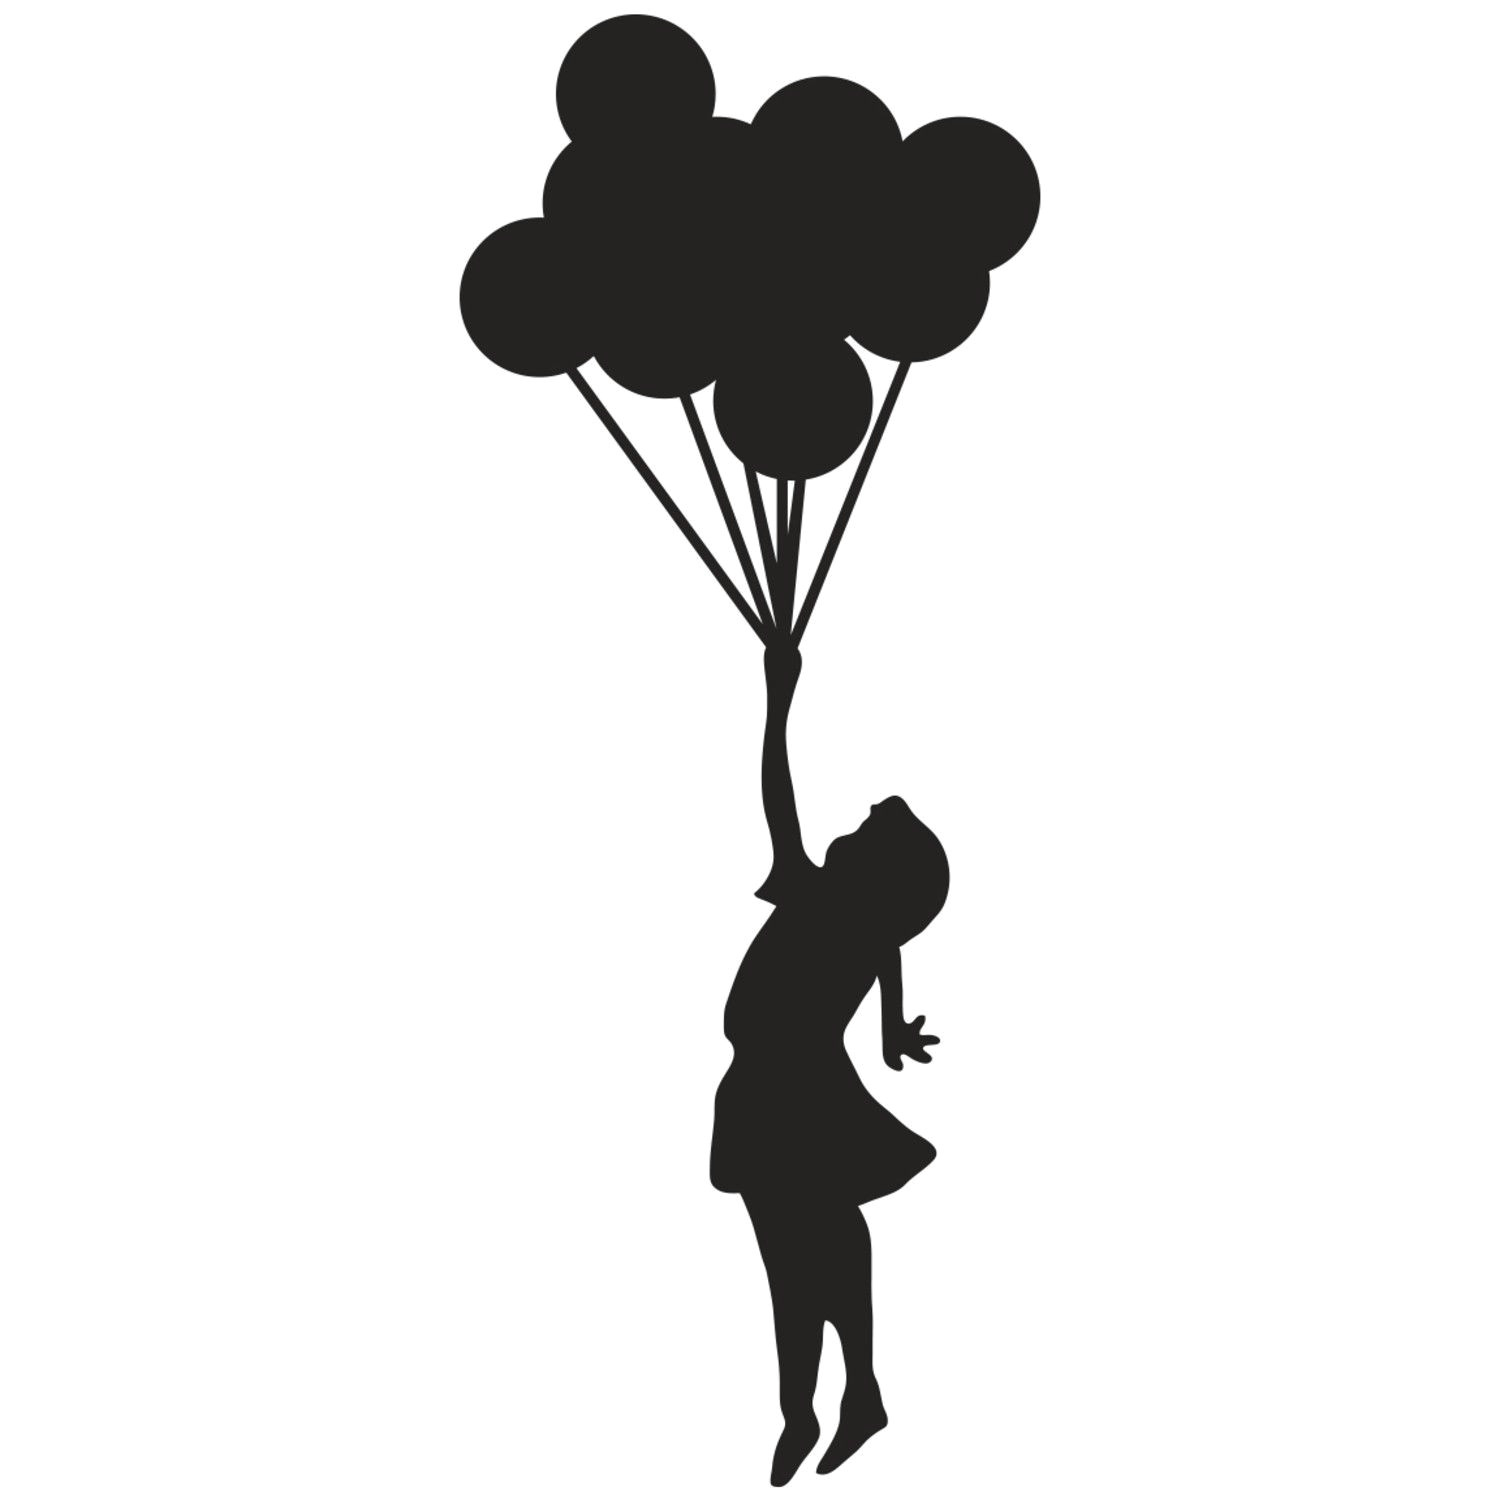 Drawing Of Girl Holding Balloons Pin by Chamutal Baruth On Stencil Banksy Art Girl Holding Balloons